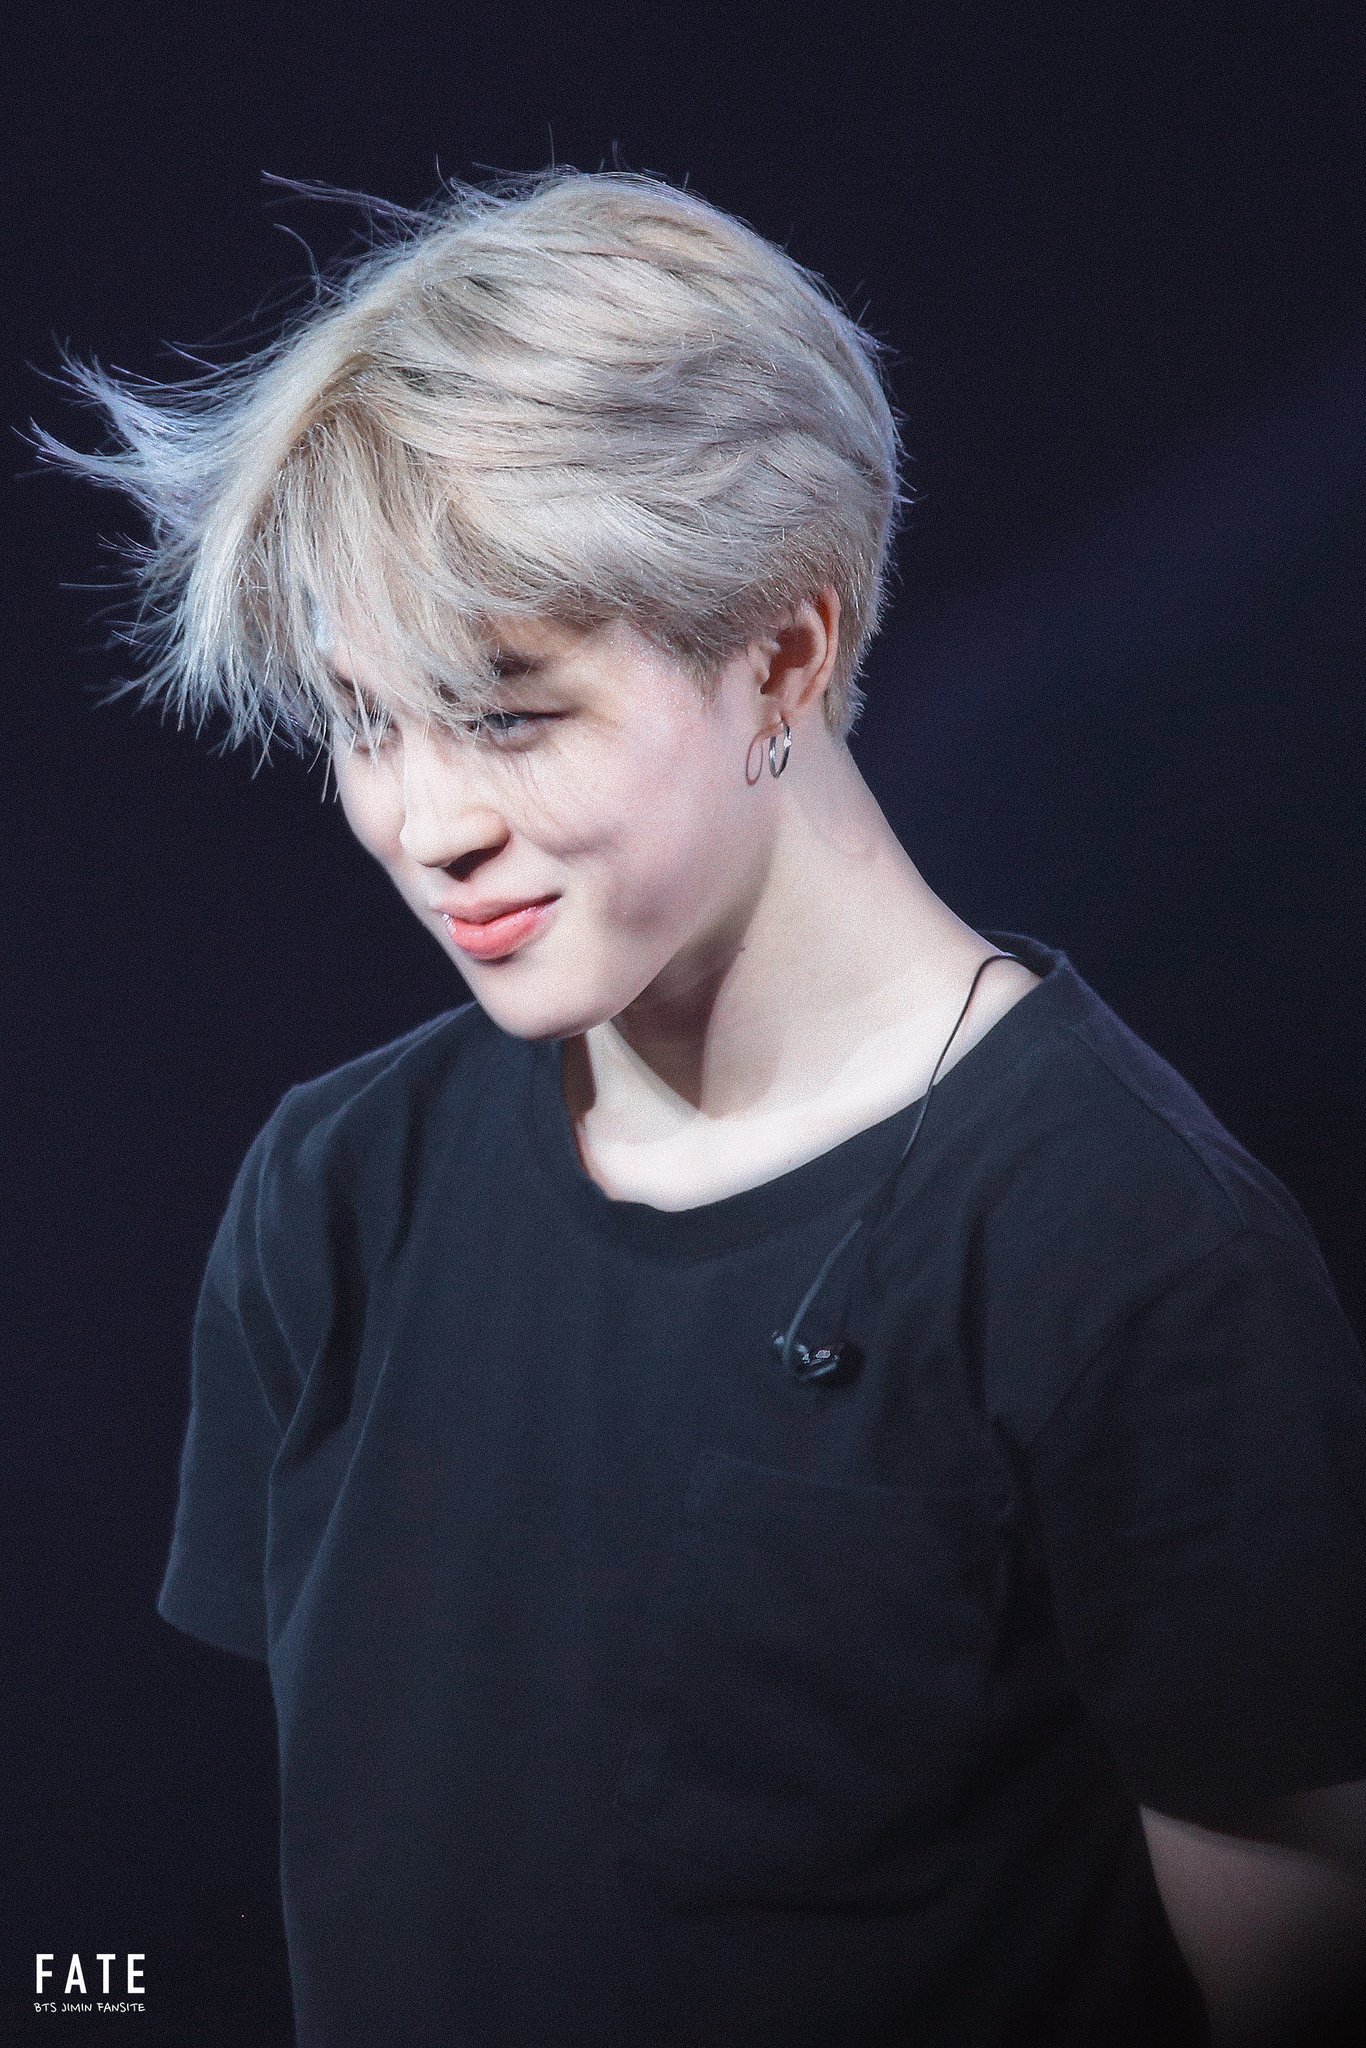 7 Reasons Why BTS' Jimin Is A “Lovely, Lovely, Lovely” Person